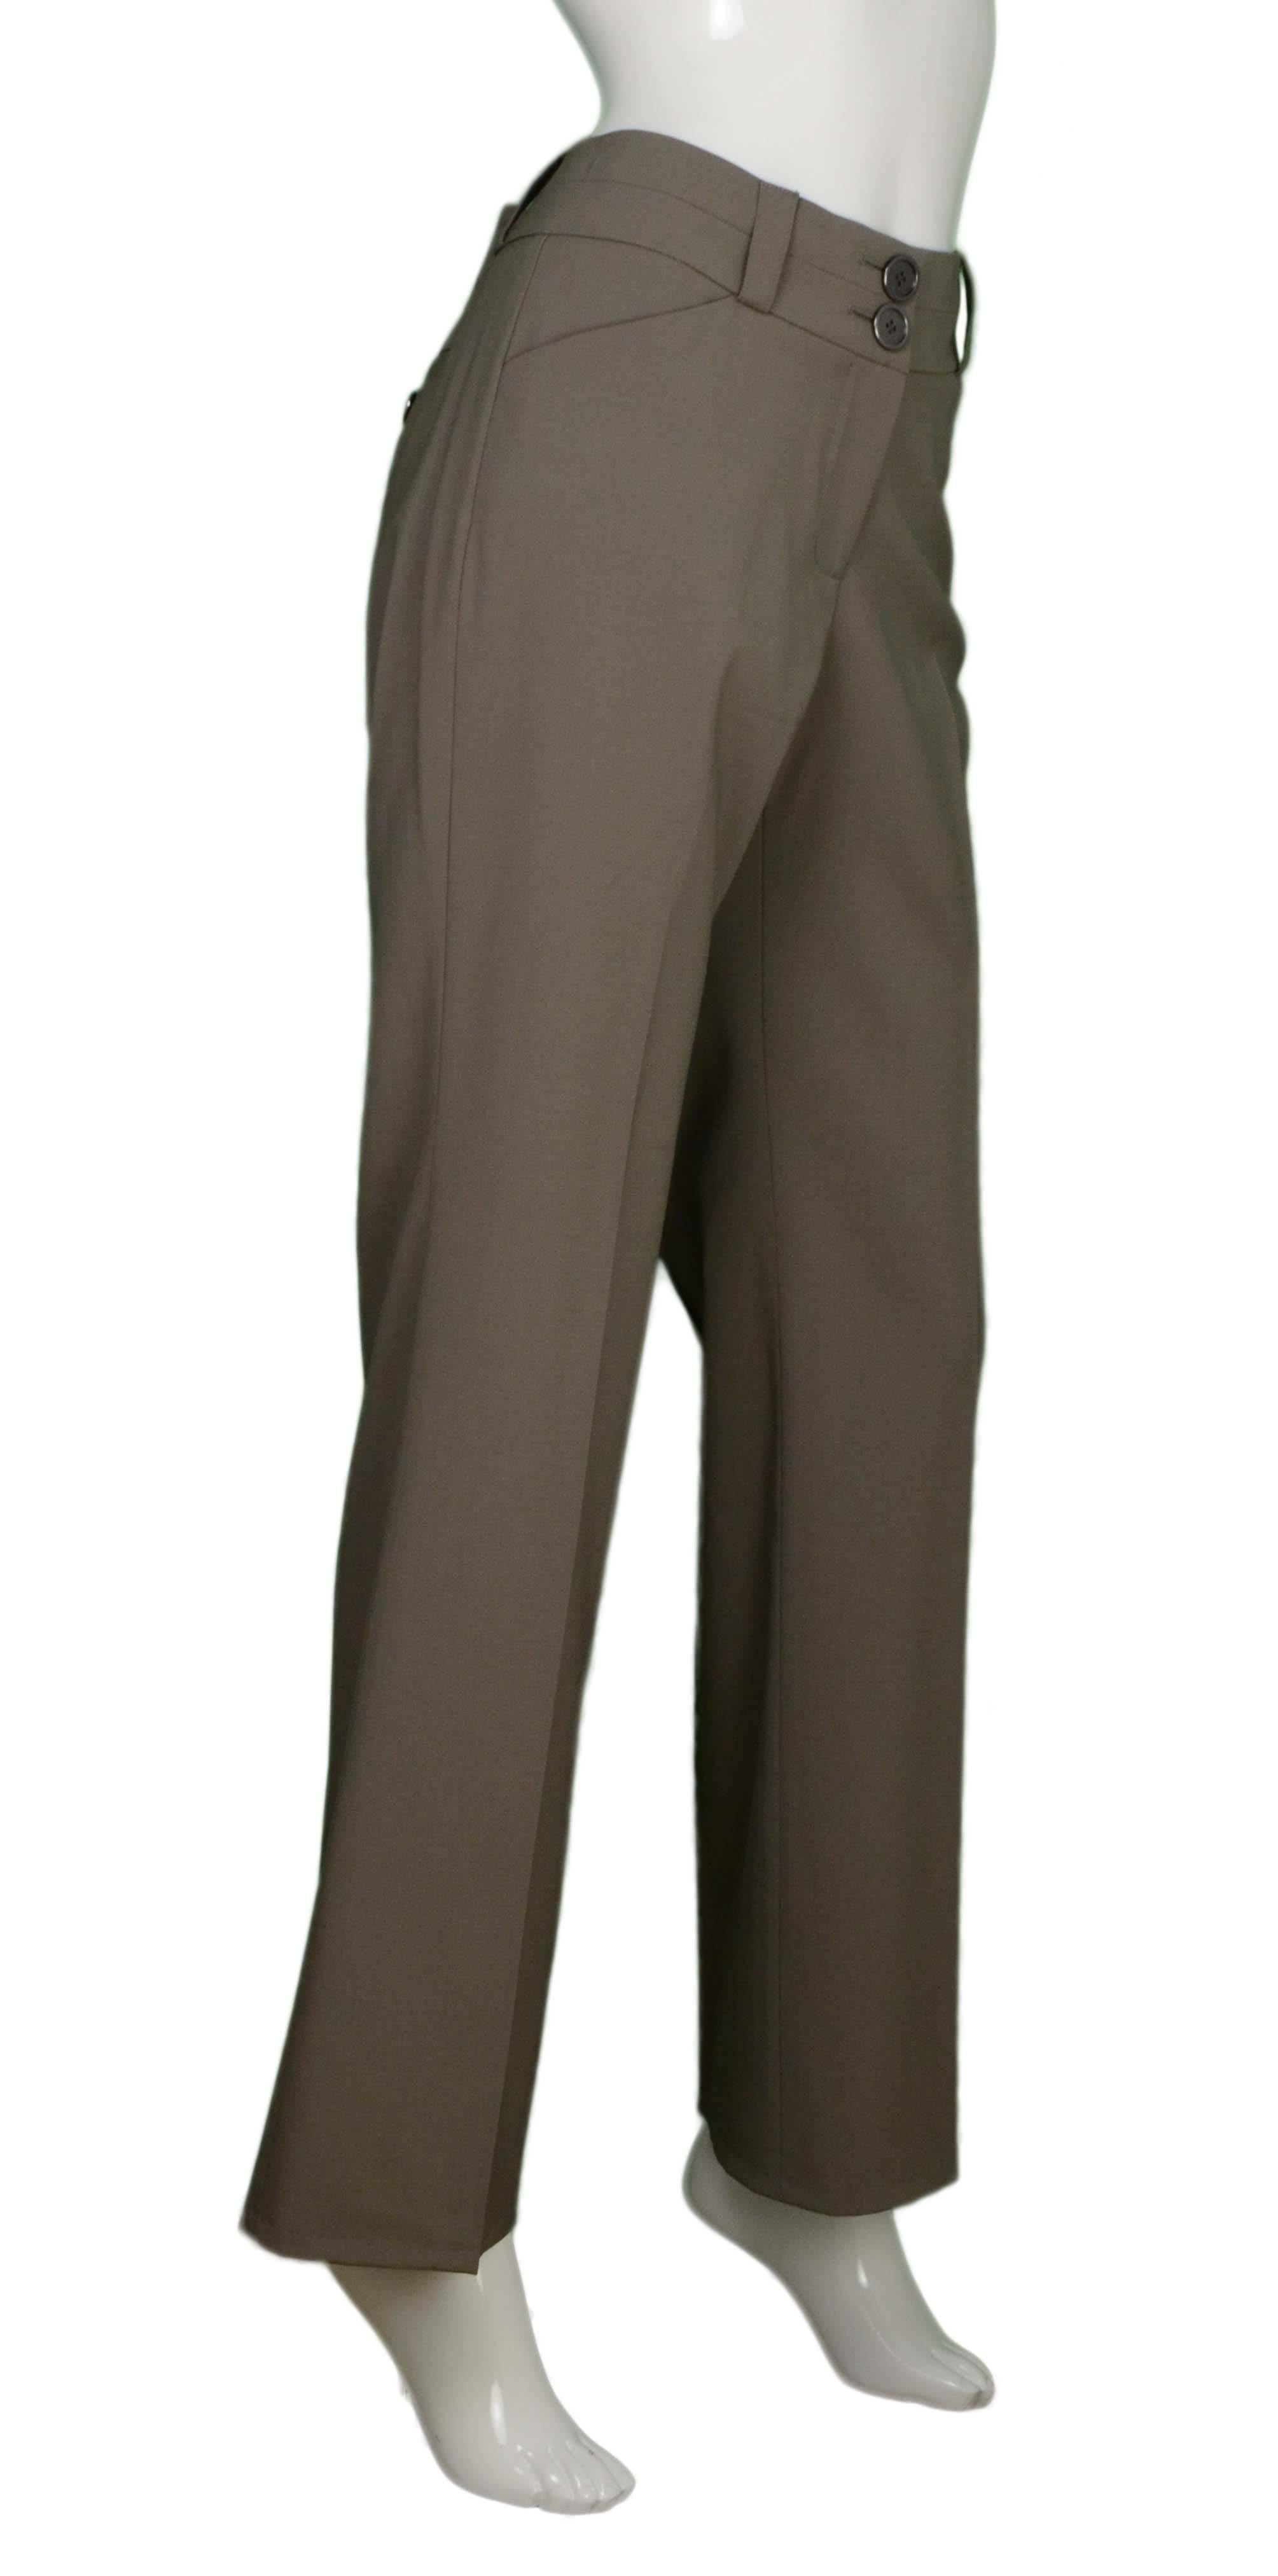 Burberry Grey Wool Wide Leg Slacks sz. 6

    Made In: Turkey

    Color: Grey

    Materials: 97% Wool, 3% Elastane

    Lining: Unlined

    Closure/Opening: Zipper and two buttons

    Exterior Pockets: Two front pockets: one at each